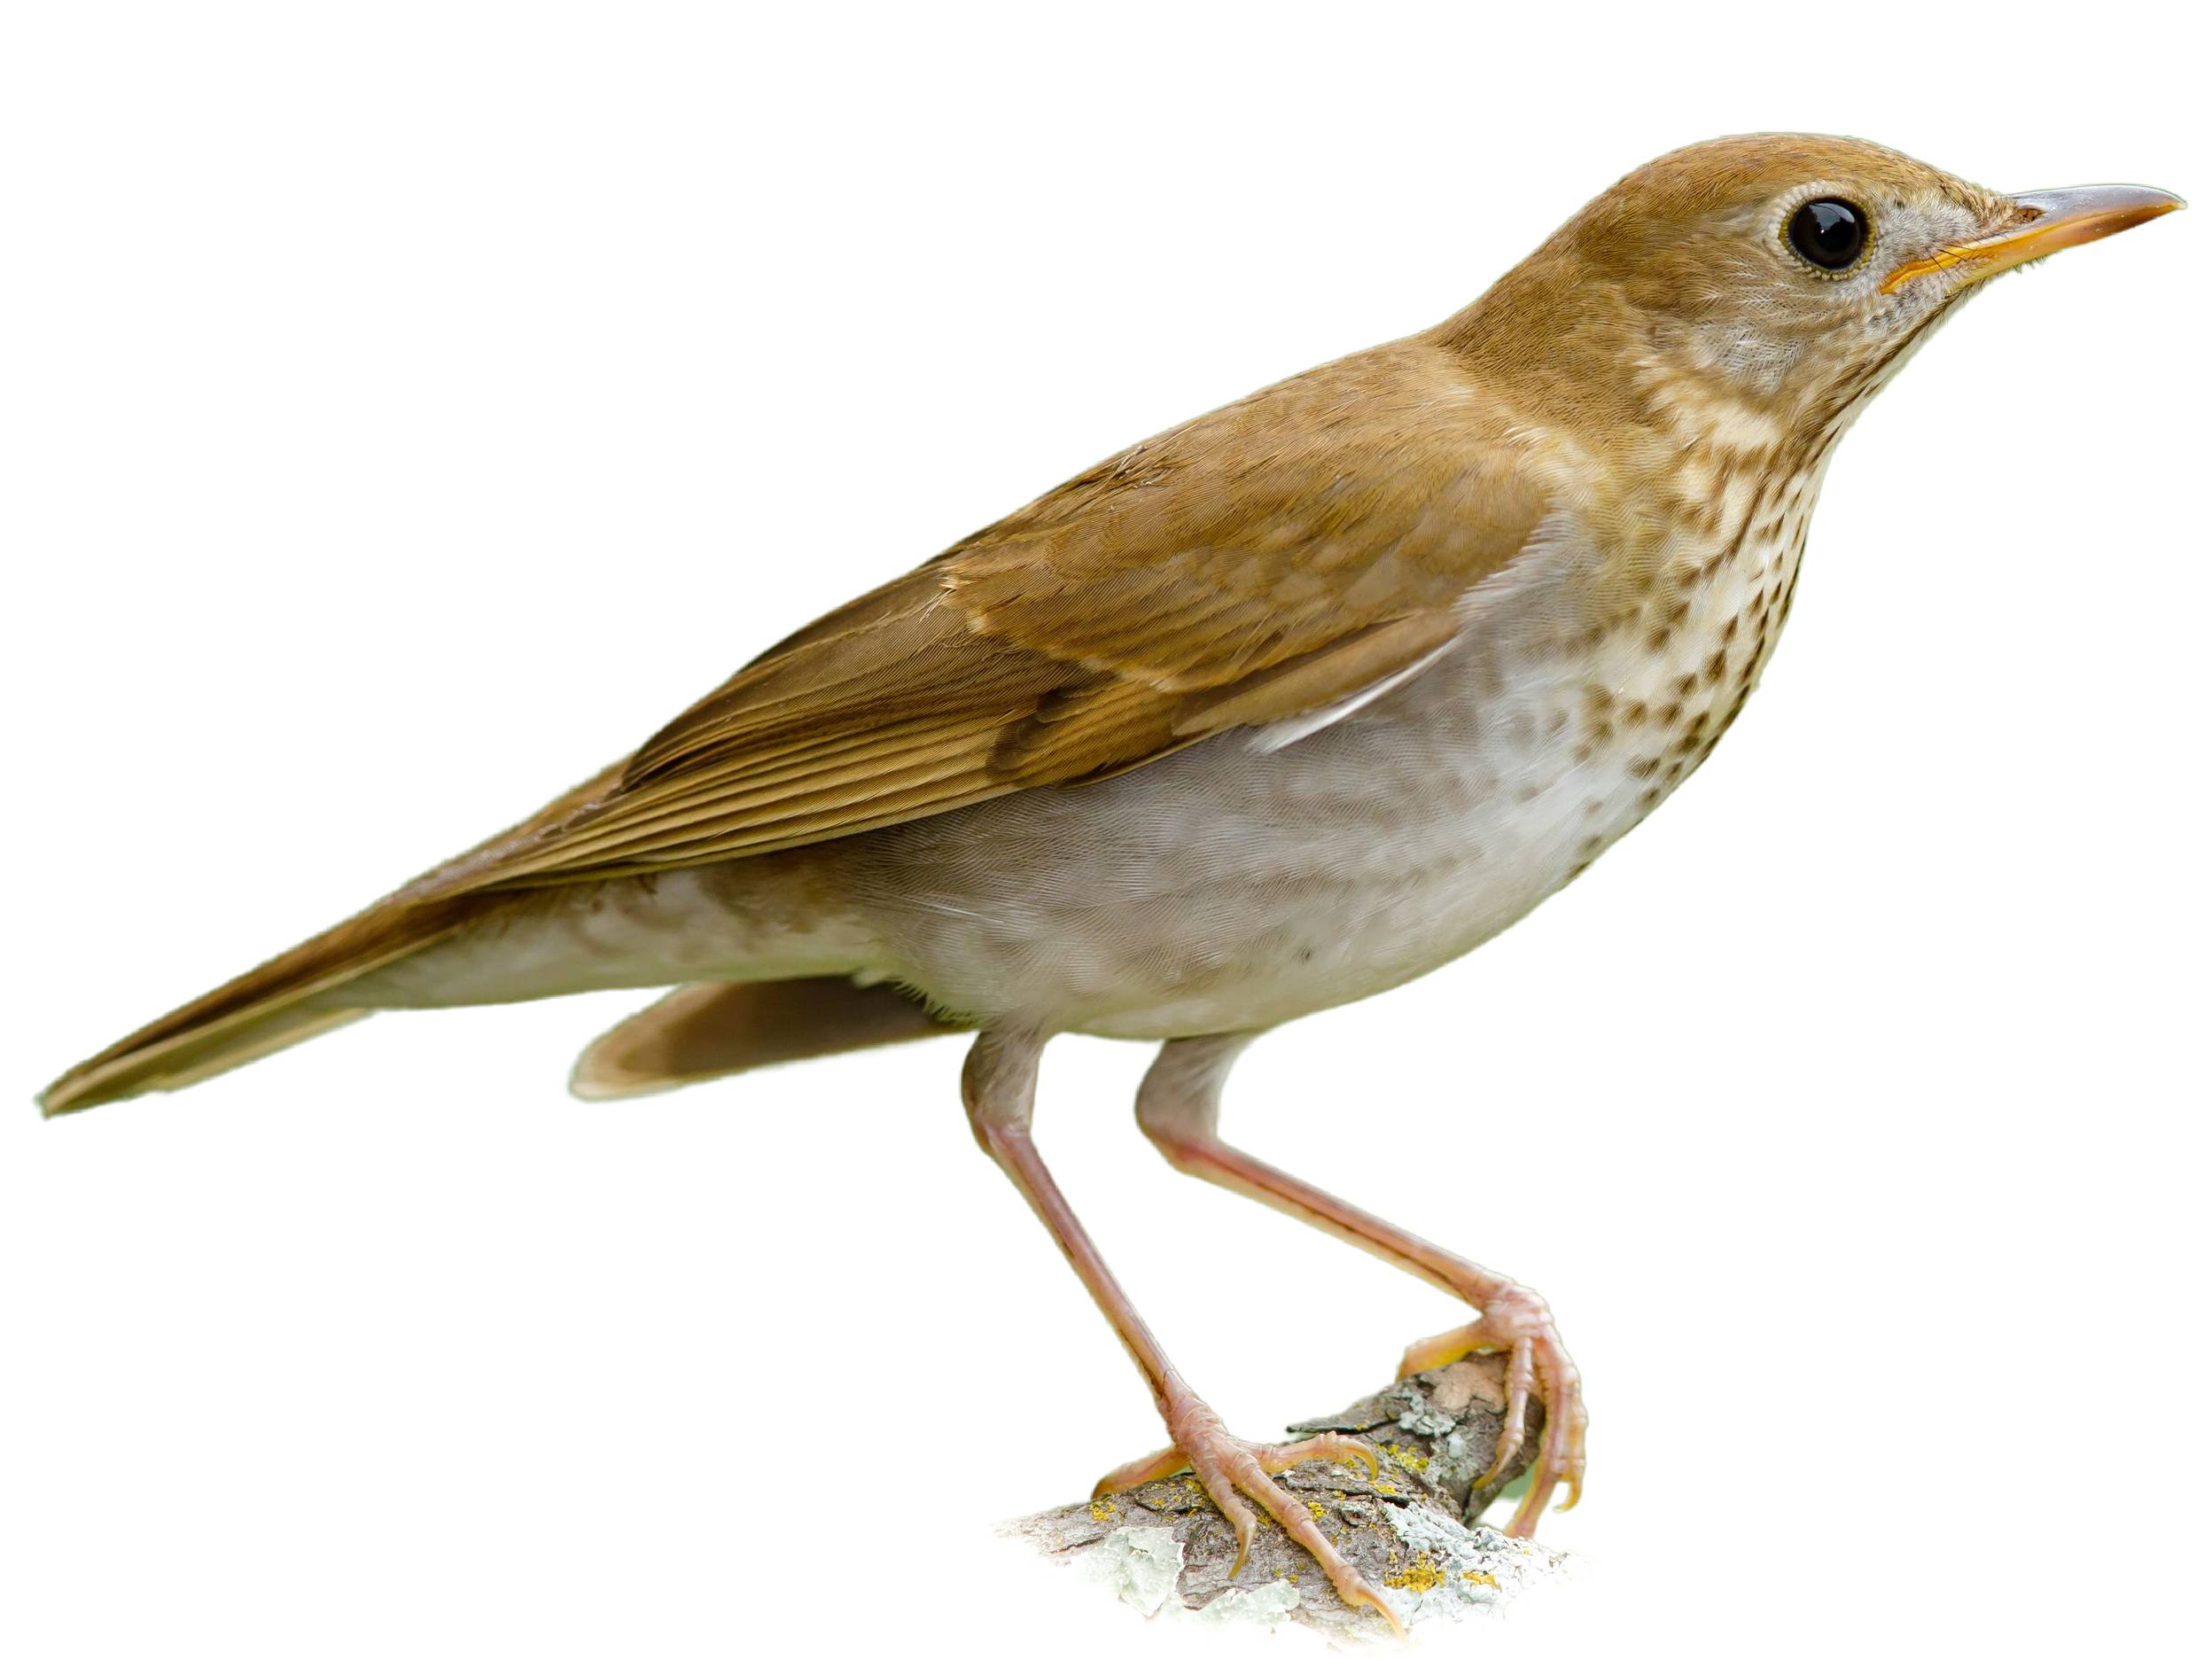 A photo of a Veery (Catharus fuscescens)